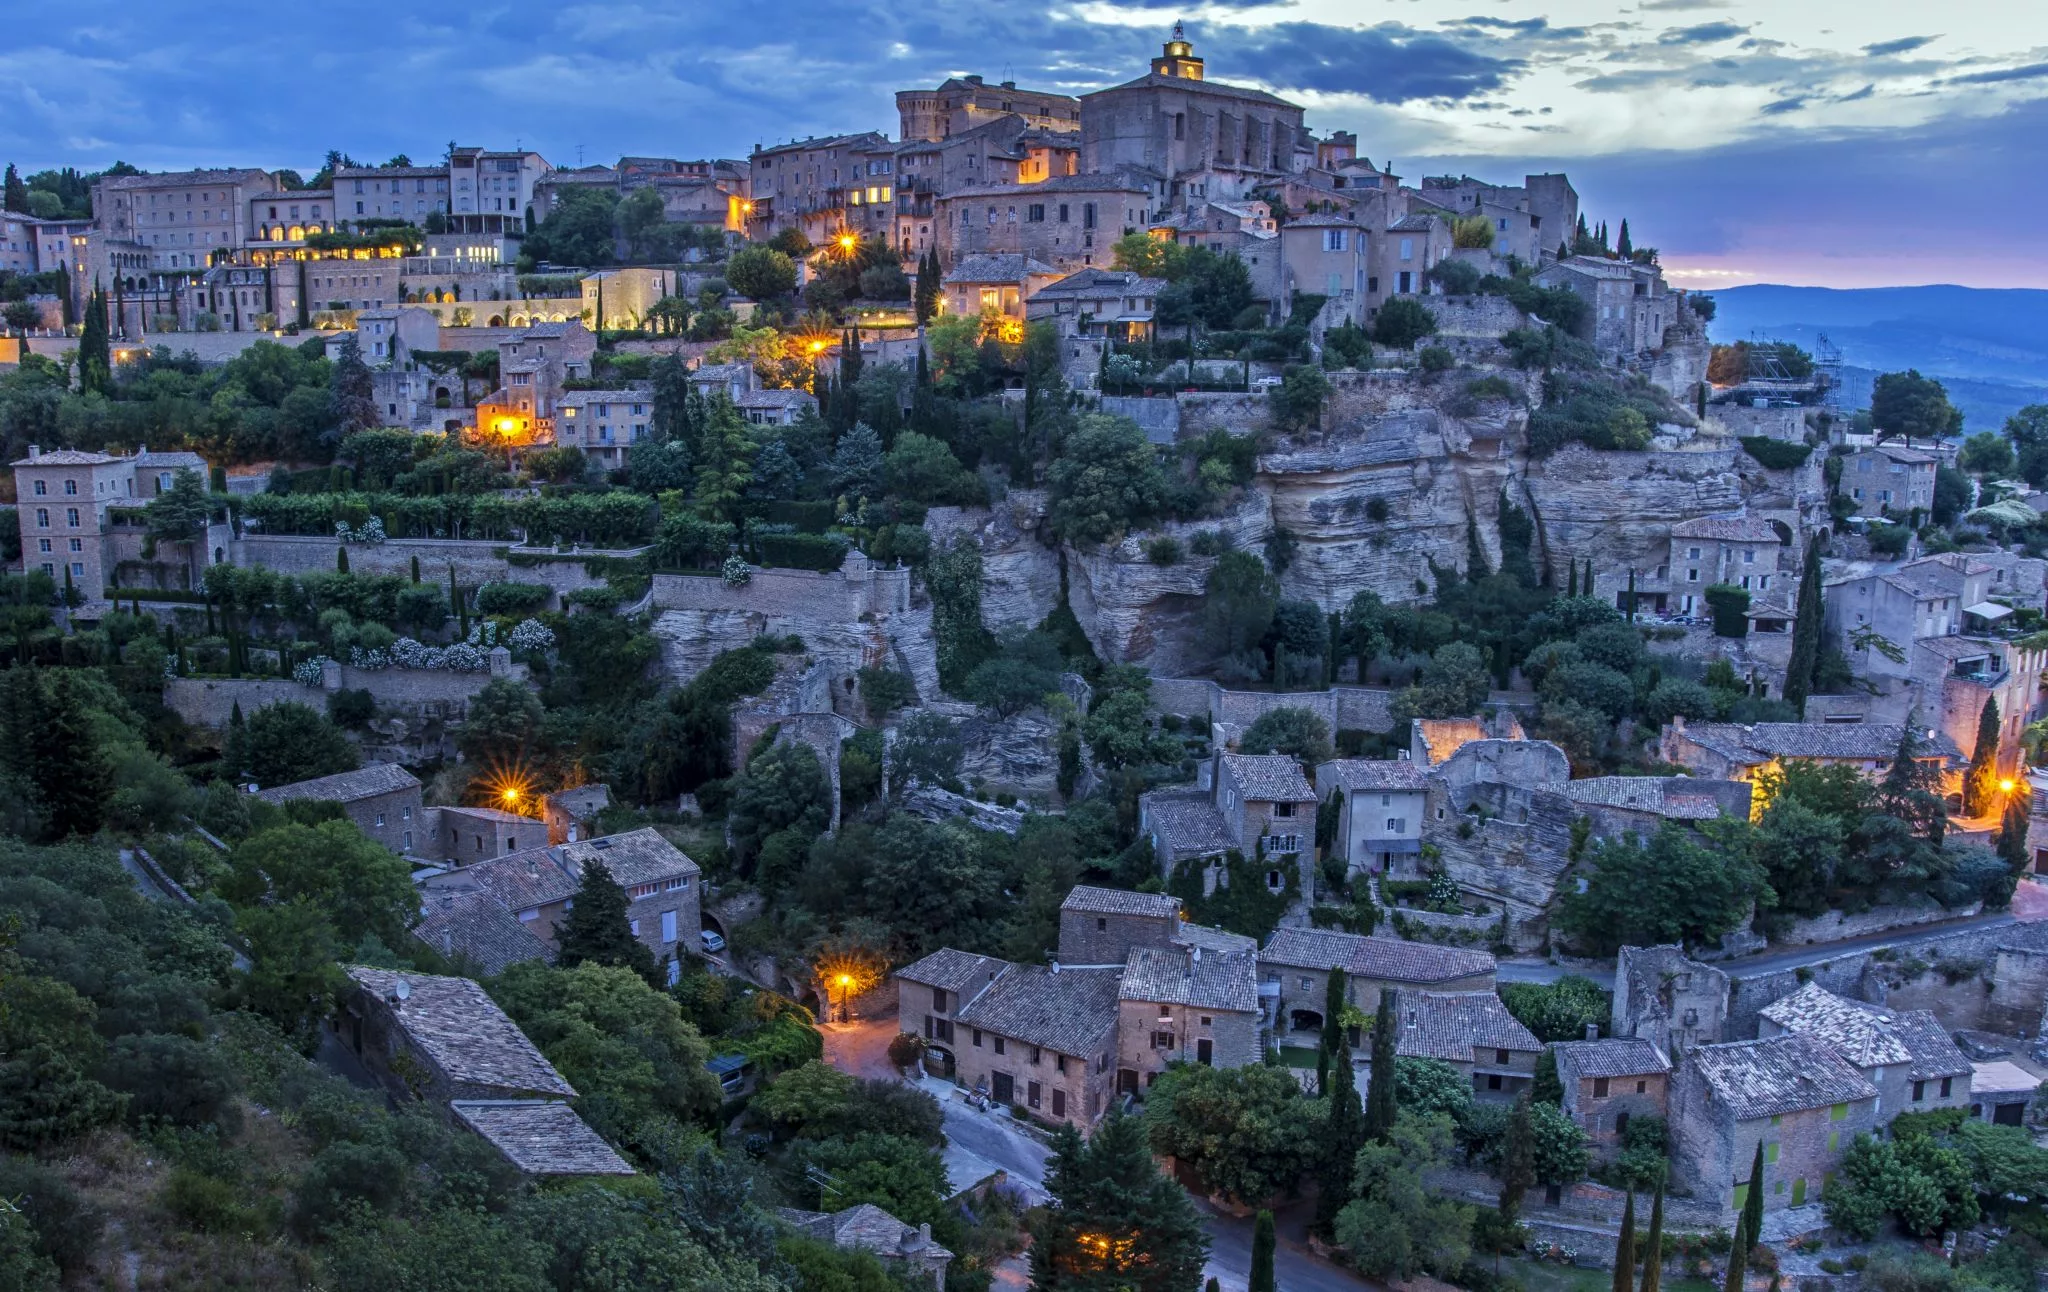 The Beautiful Village of Gordes, France